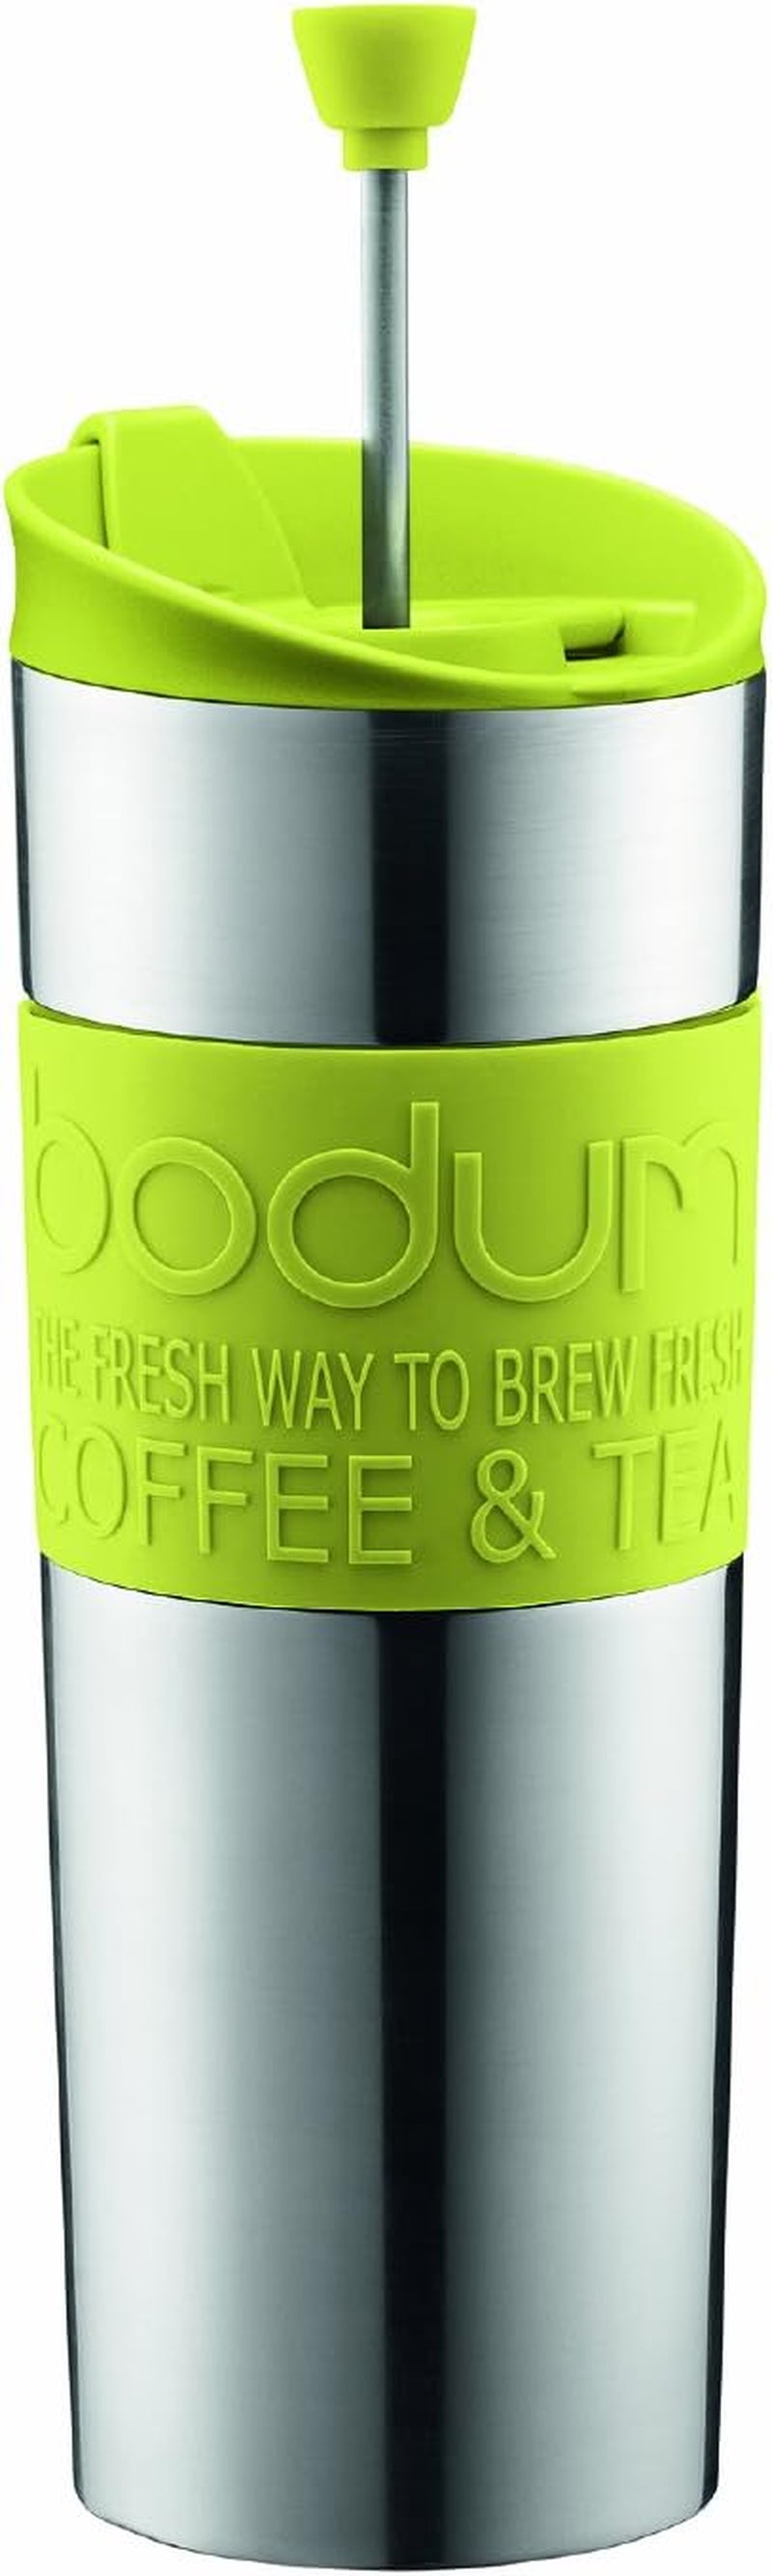 Bodum Travel Press, Stainless Steel Travel Coffee and Tea Press, 15 Ounce, .45 Liter, Black,1 Count (Pack of 1)